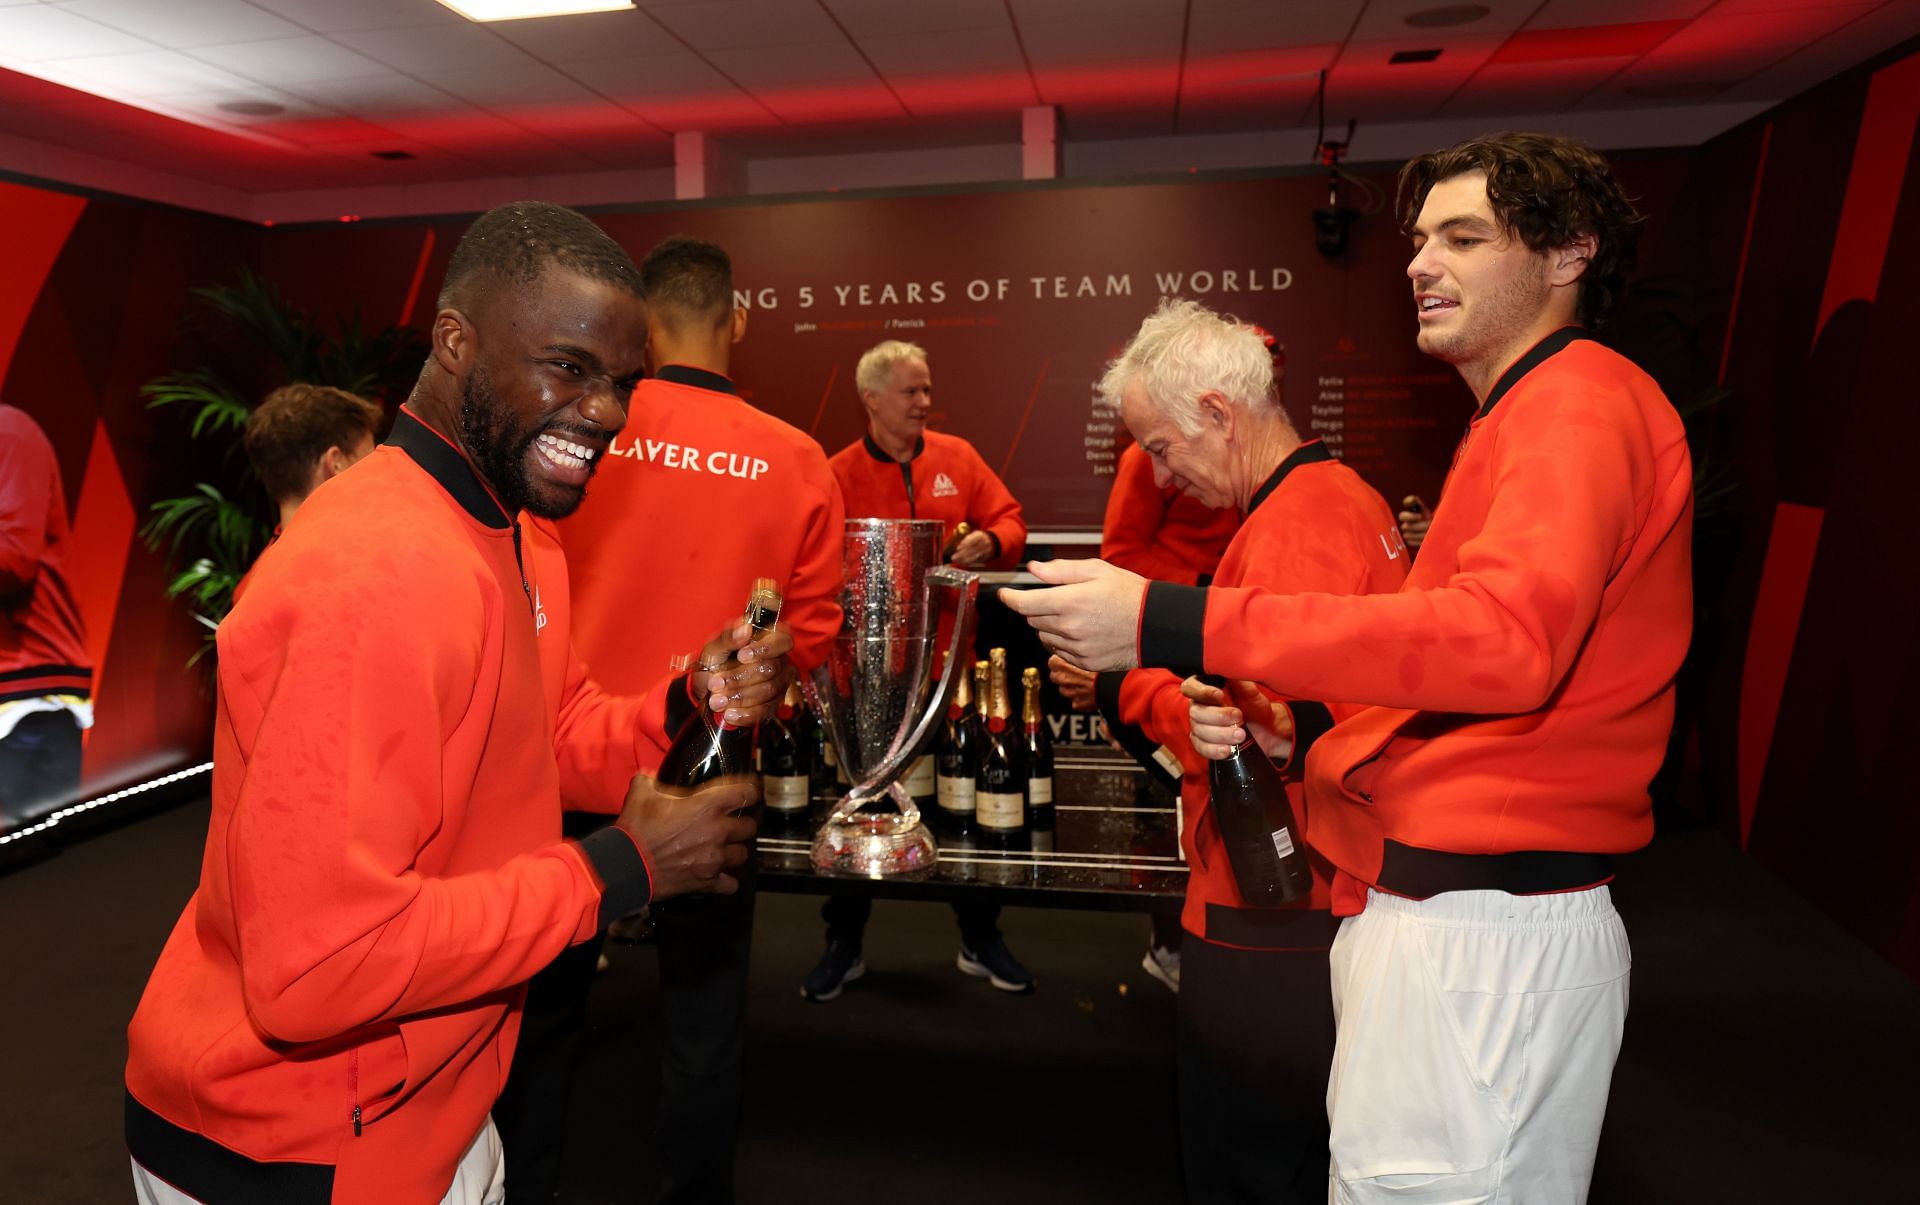 Taylor Fritz and Frances Tiafoe of Team World celebrating victory